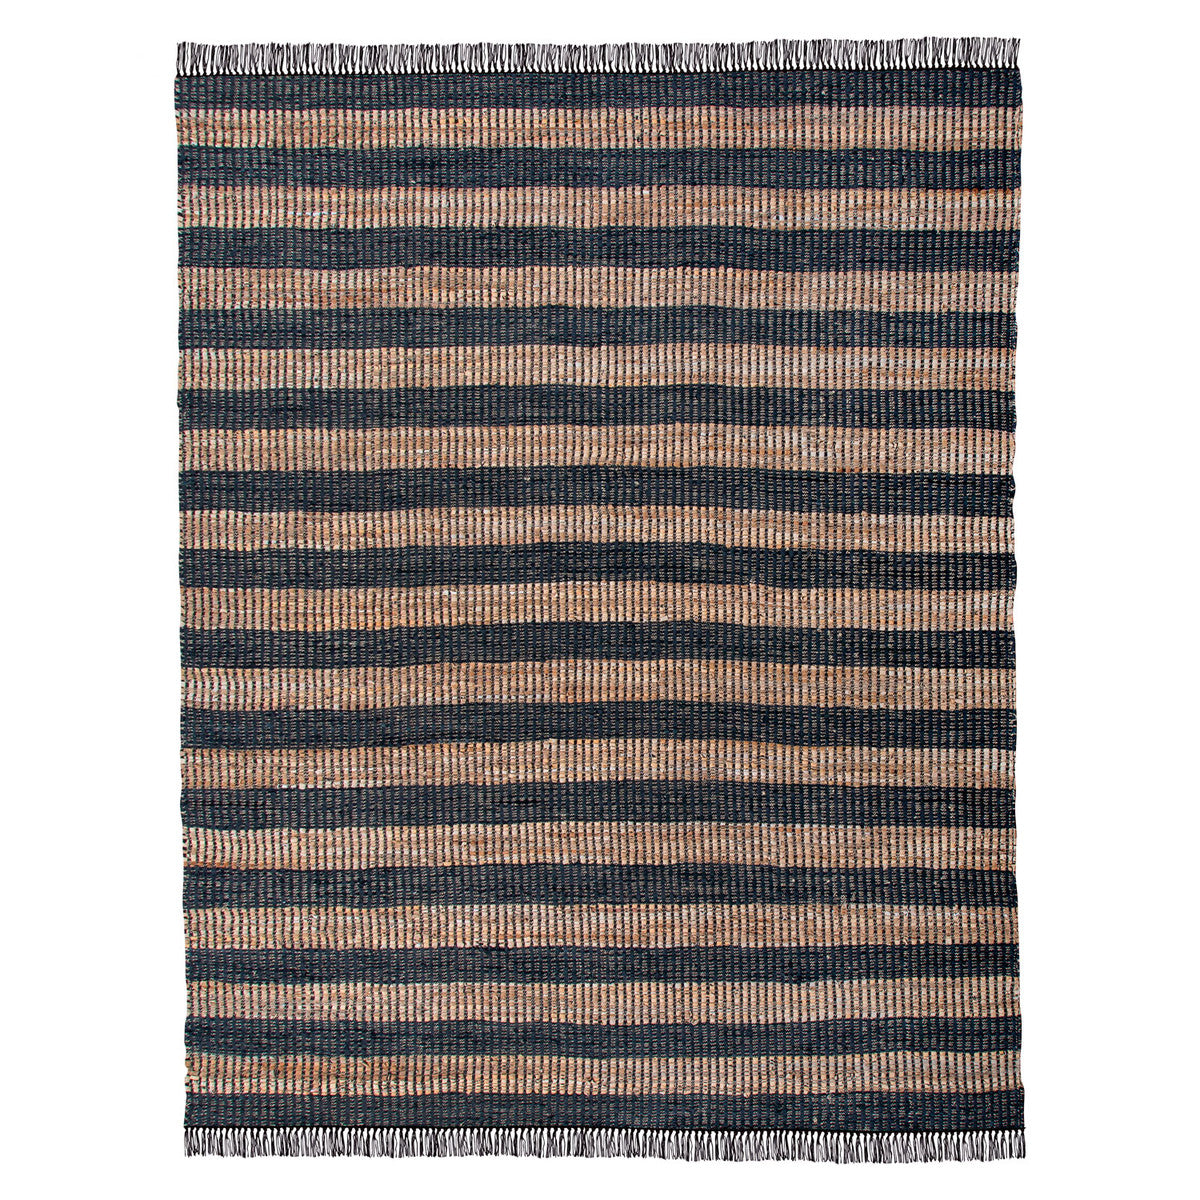 Leather and Hemp Woven Rug